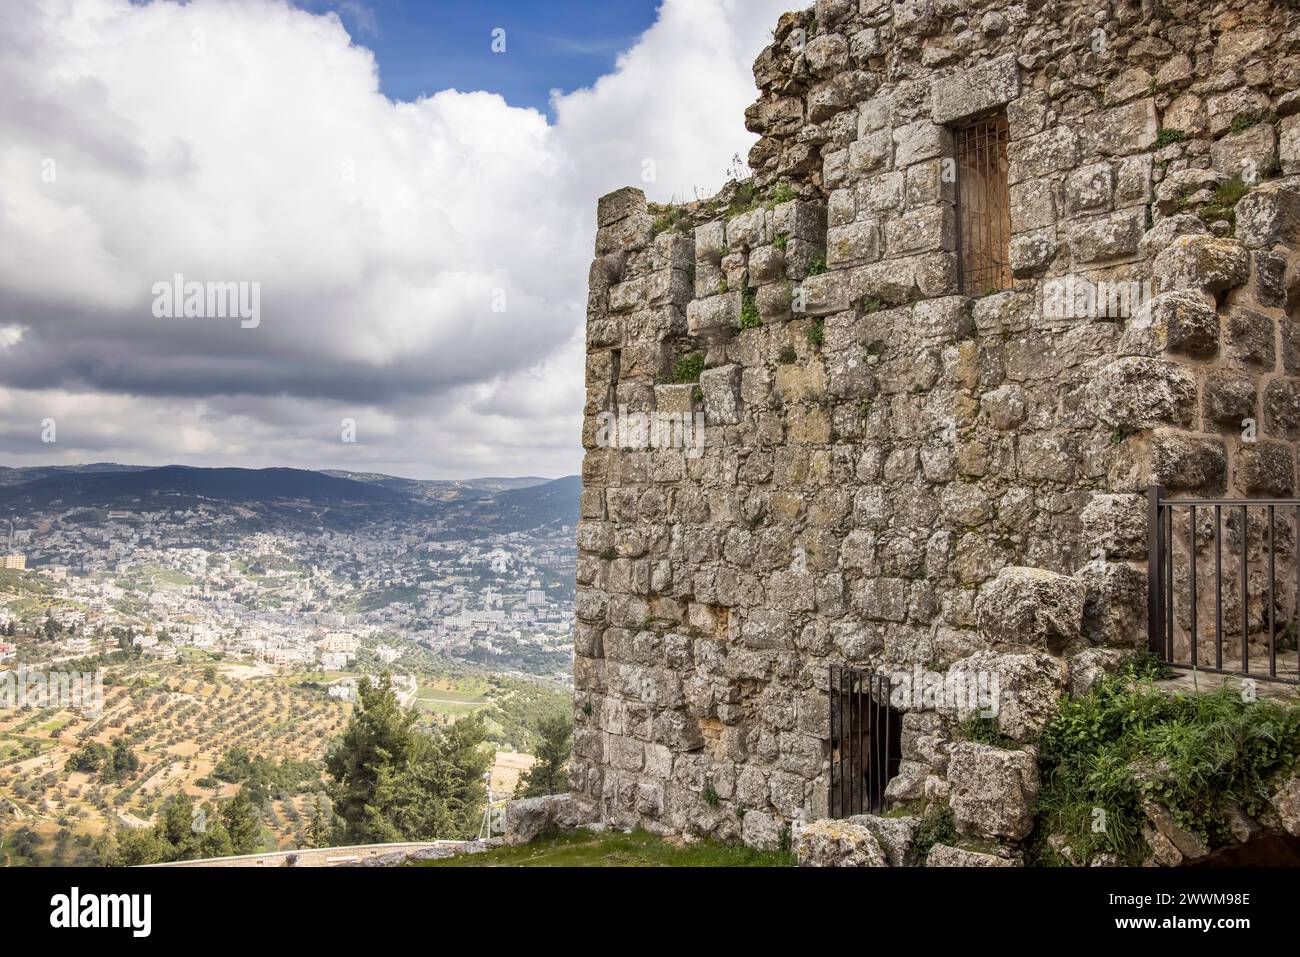 ajloun castle dating from around 1185 built on top of mount auf at 1250m in jordan Stock Photo